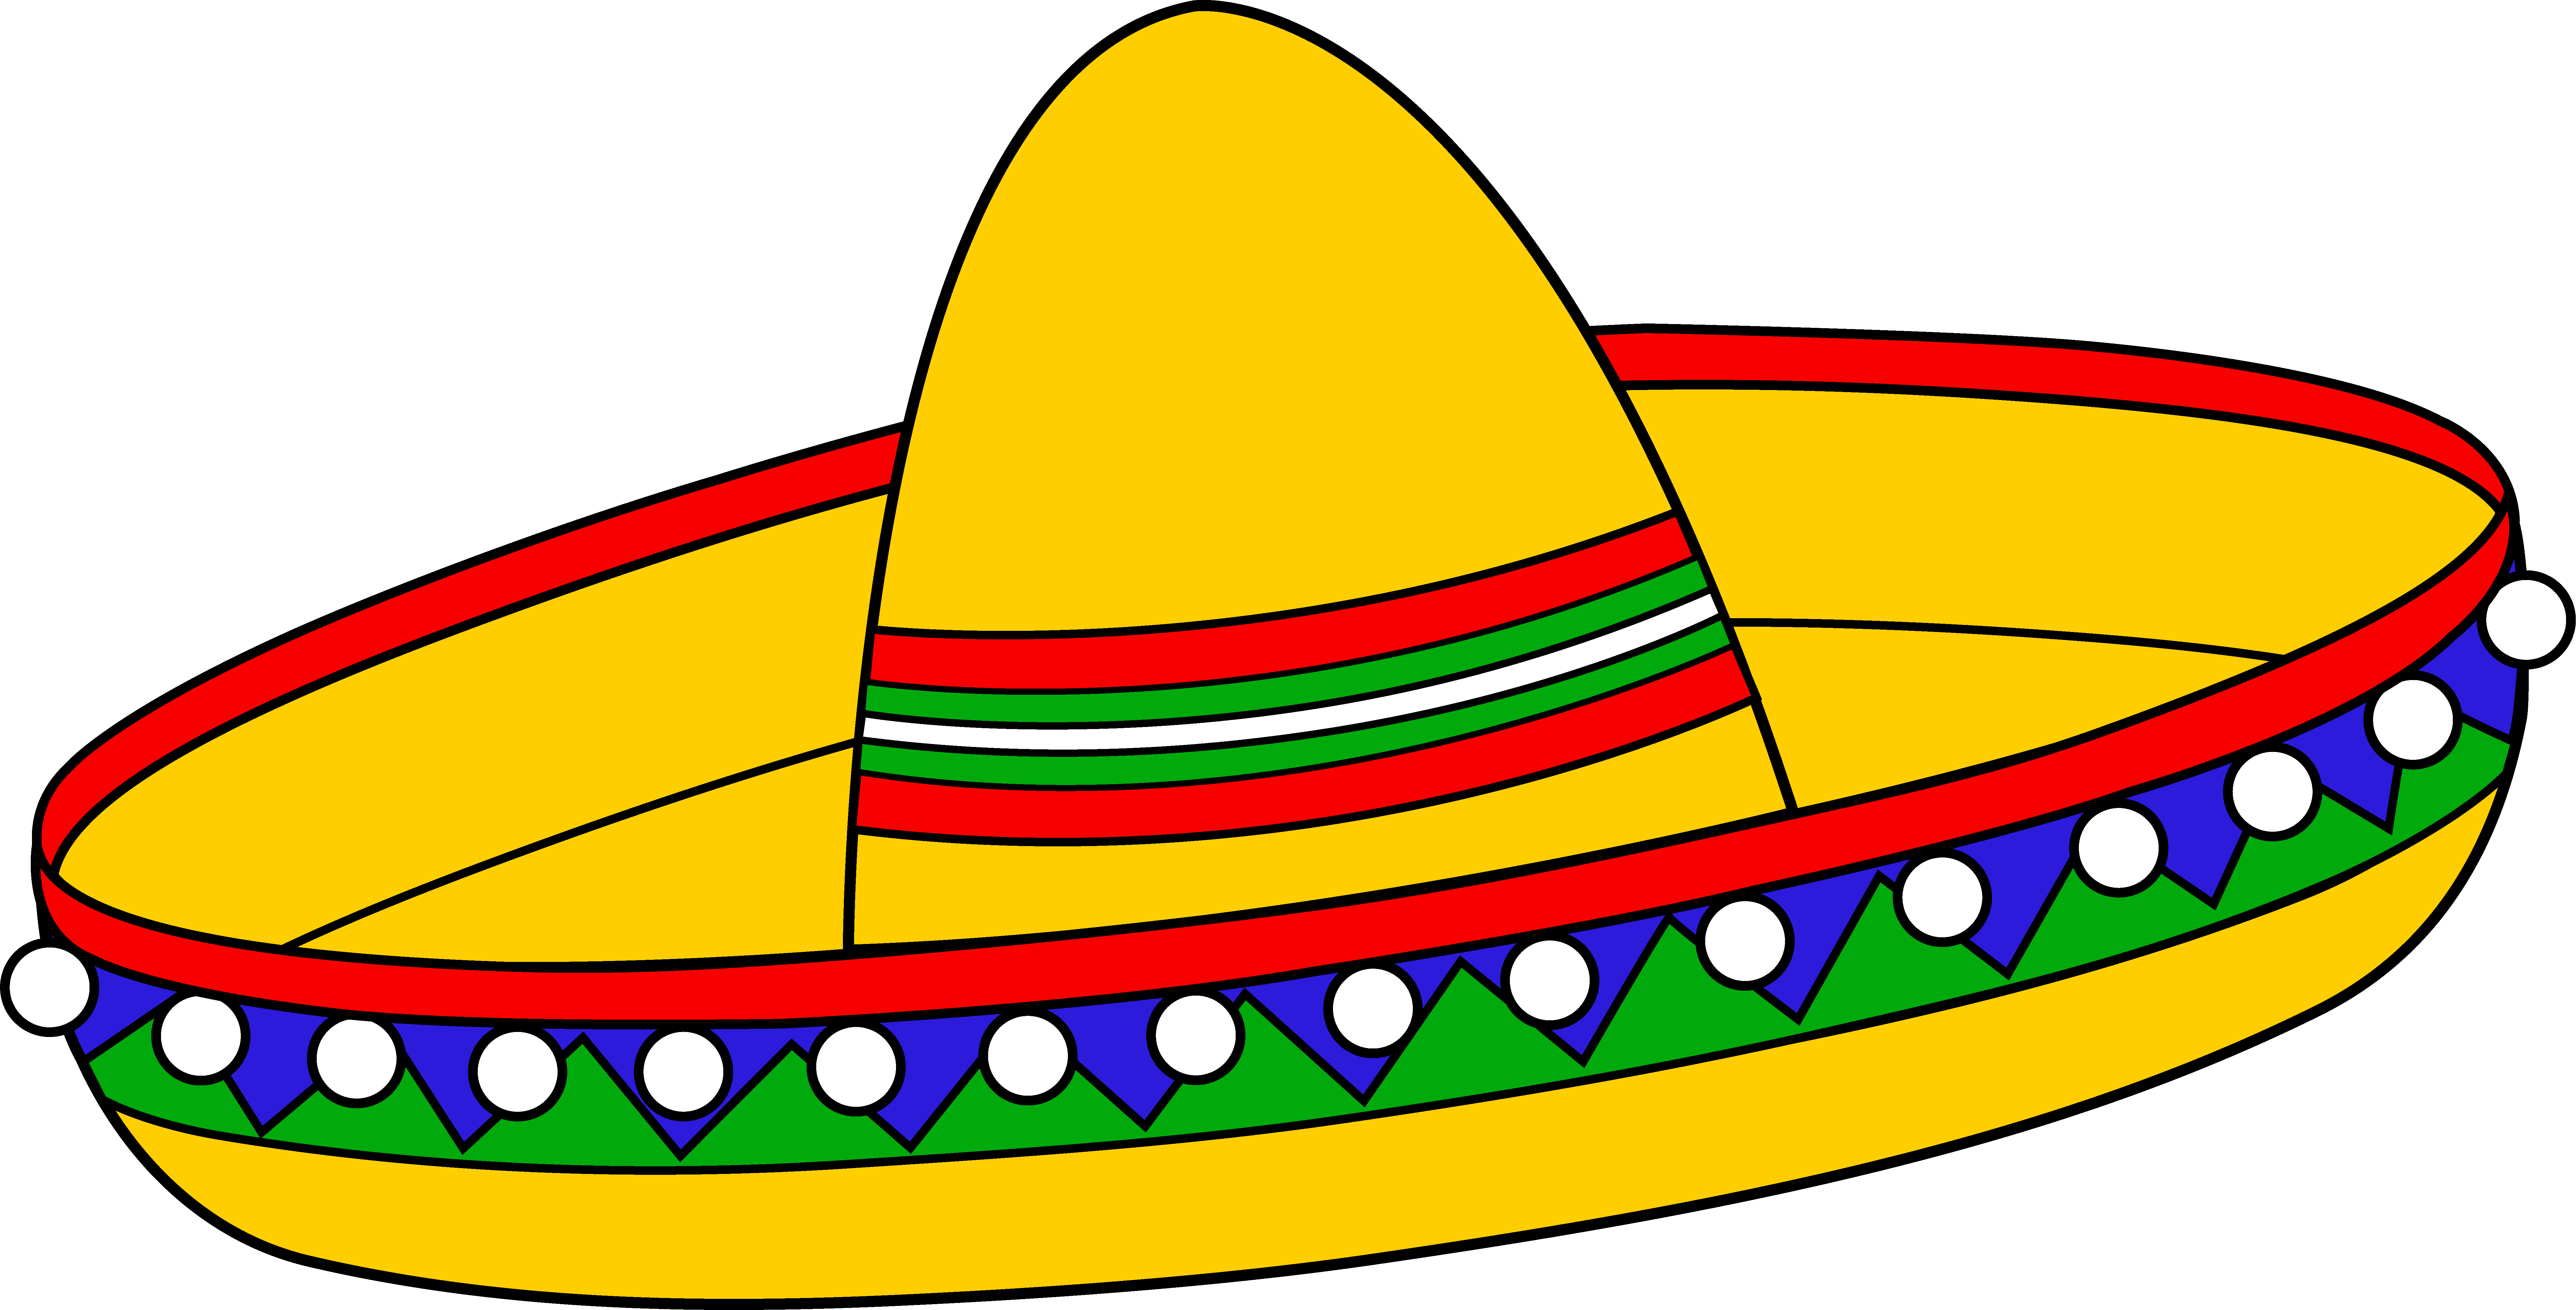 Colorful mexican sombrero hat. Excited clipart alive